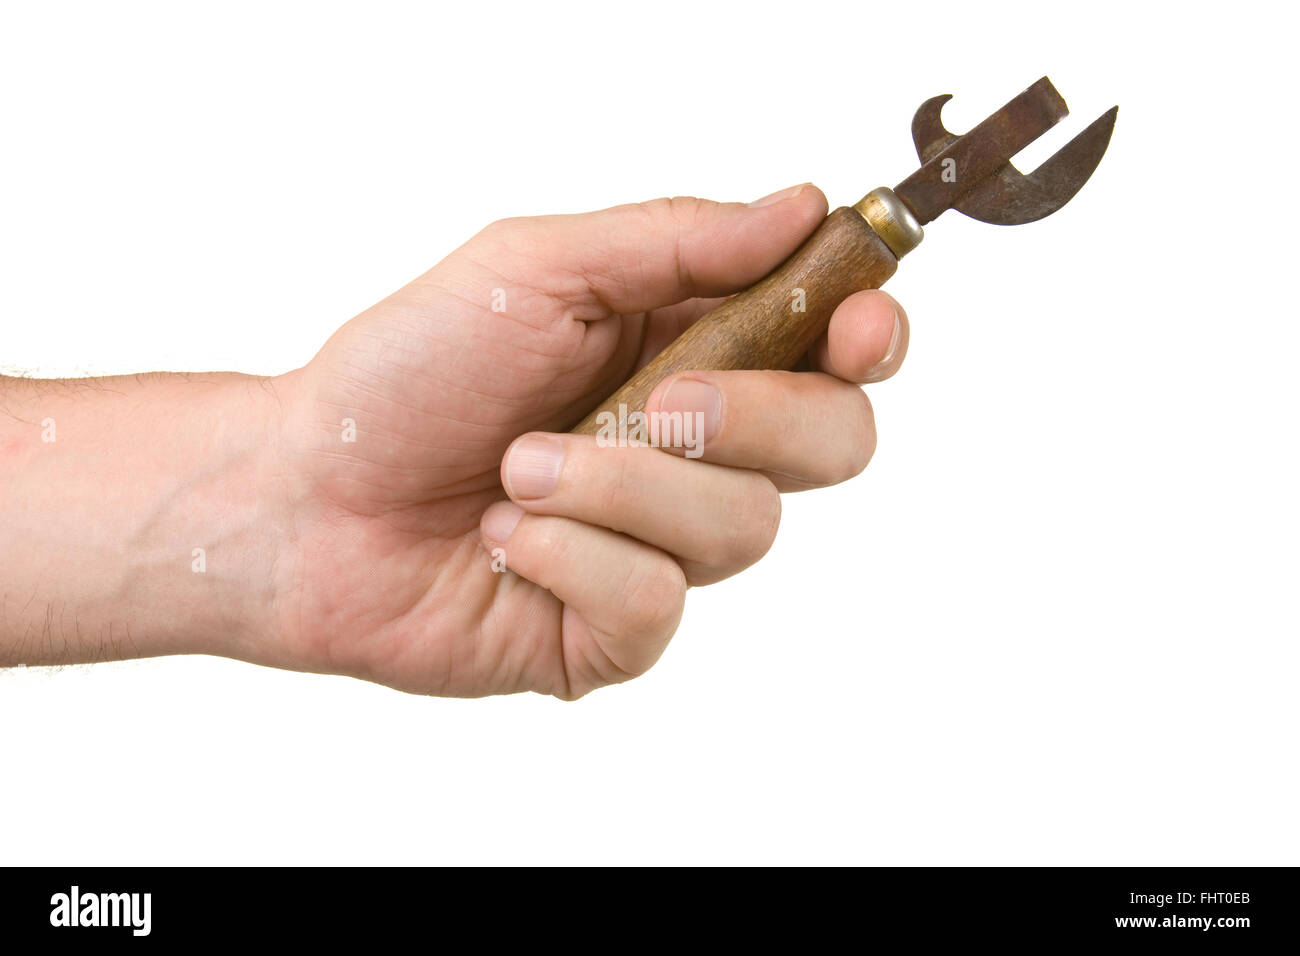 https://c8.alamy.com/comp/FHT0EB/old-can-opener-in-hand-FHT0EB.jpg